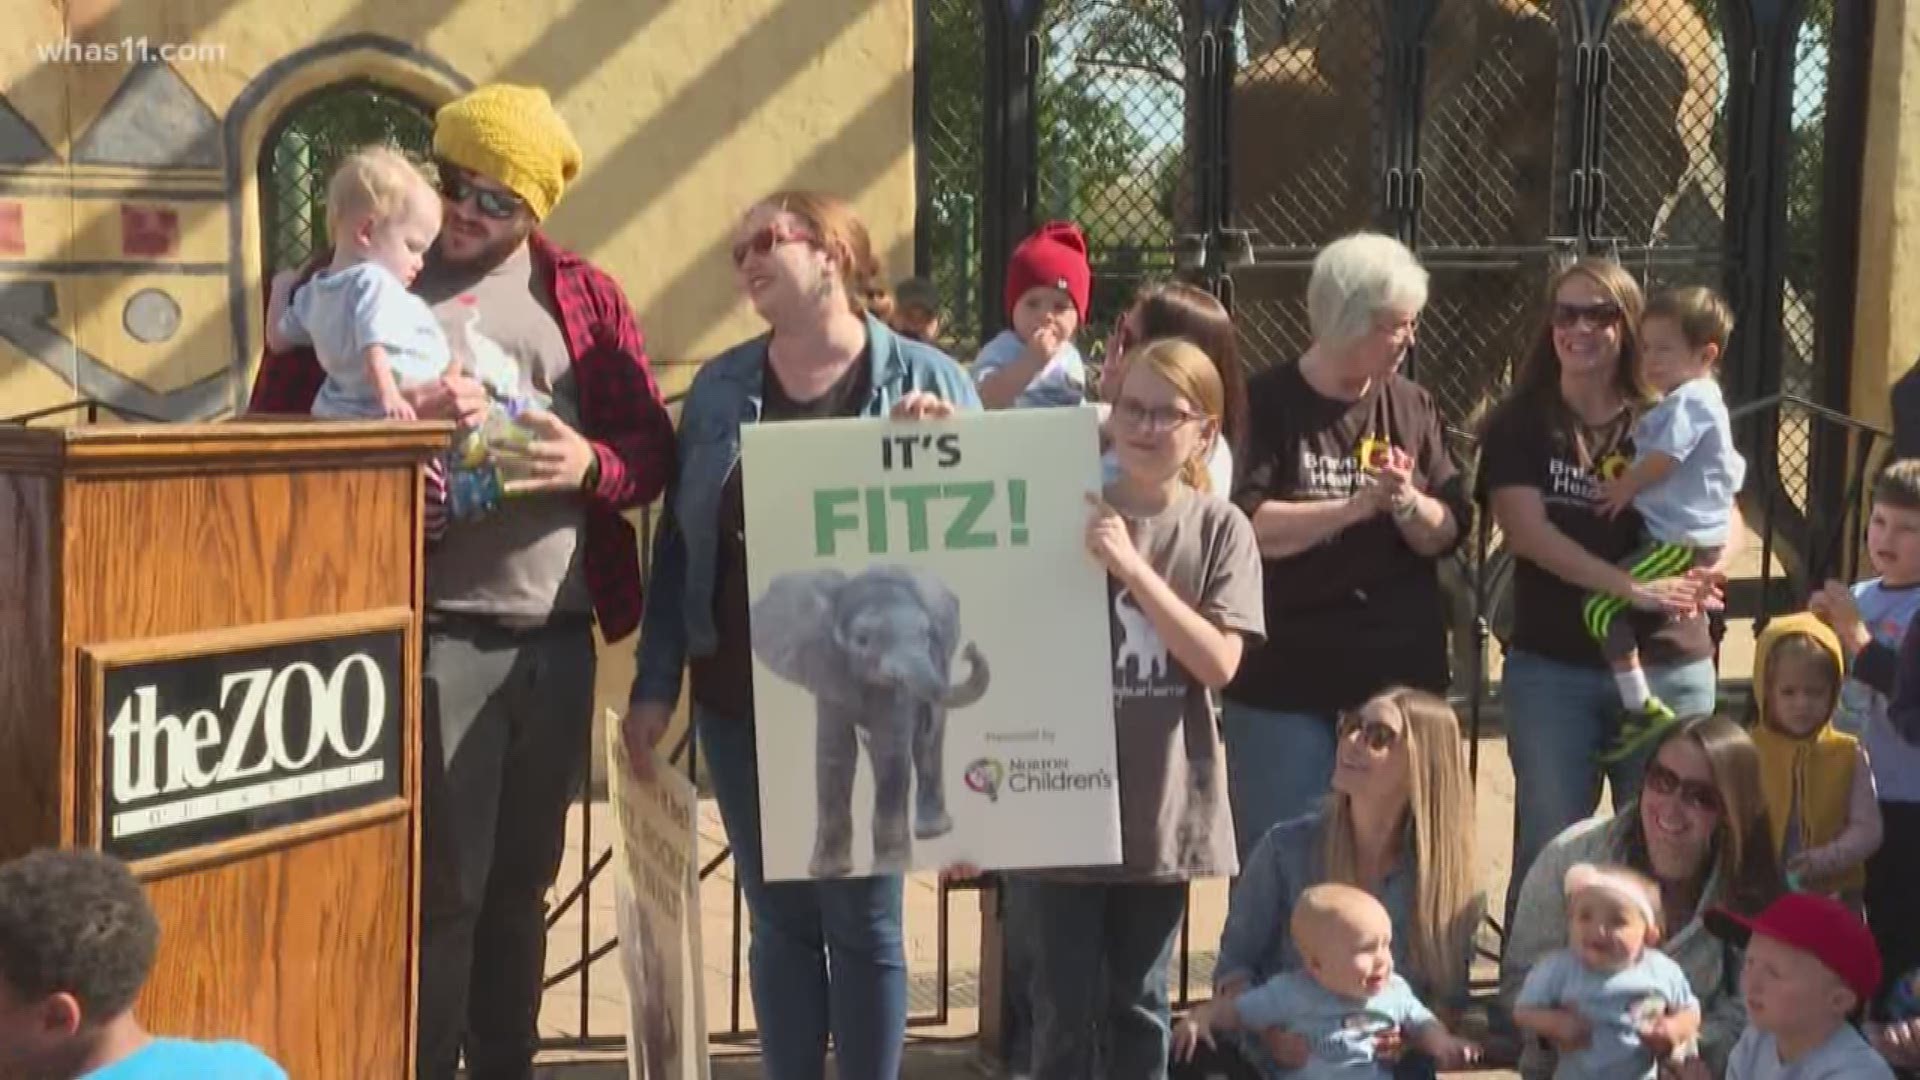 The Louisville Zoo named the new baby elephant, Fitz